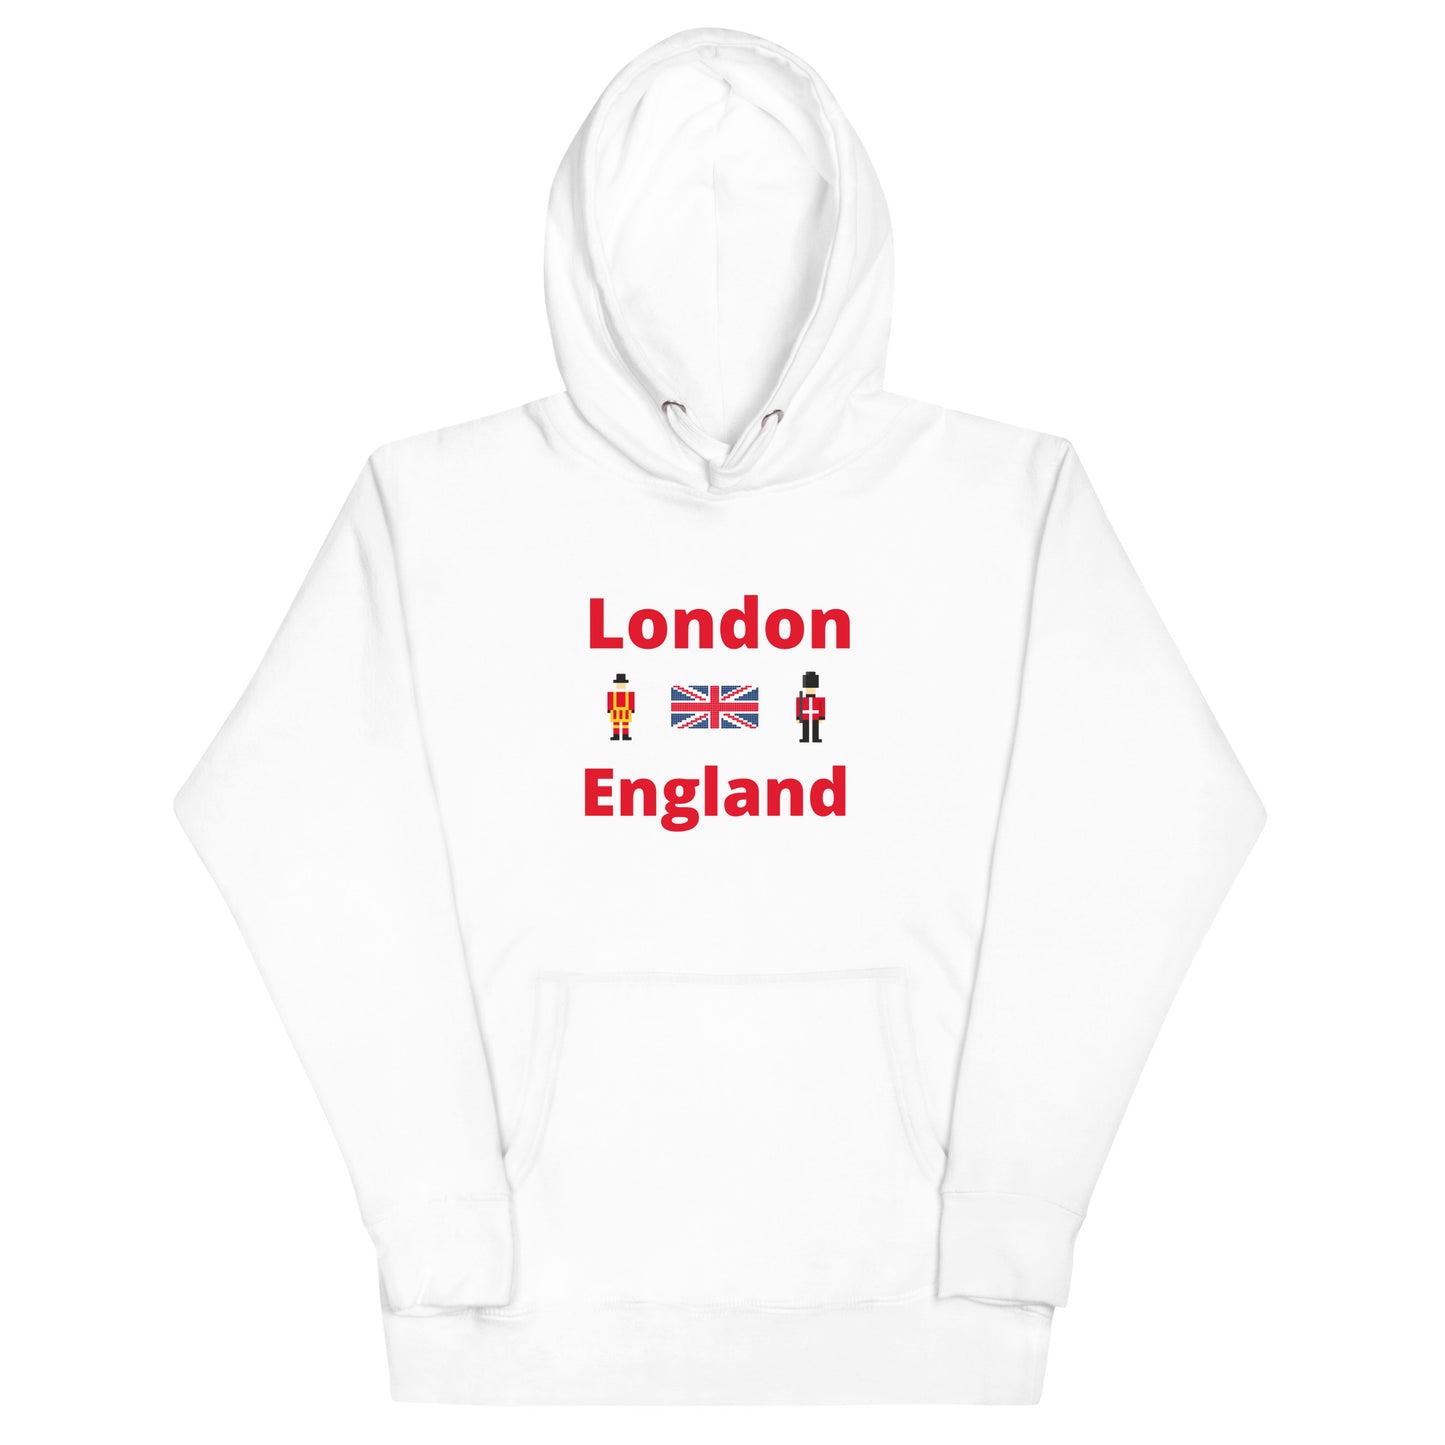 London England Unisex Hoodie With Royal Guard and Union Jack Flag